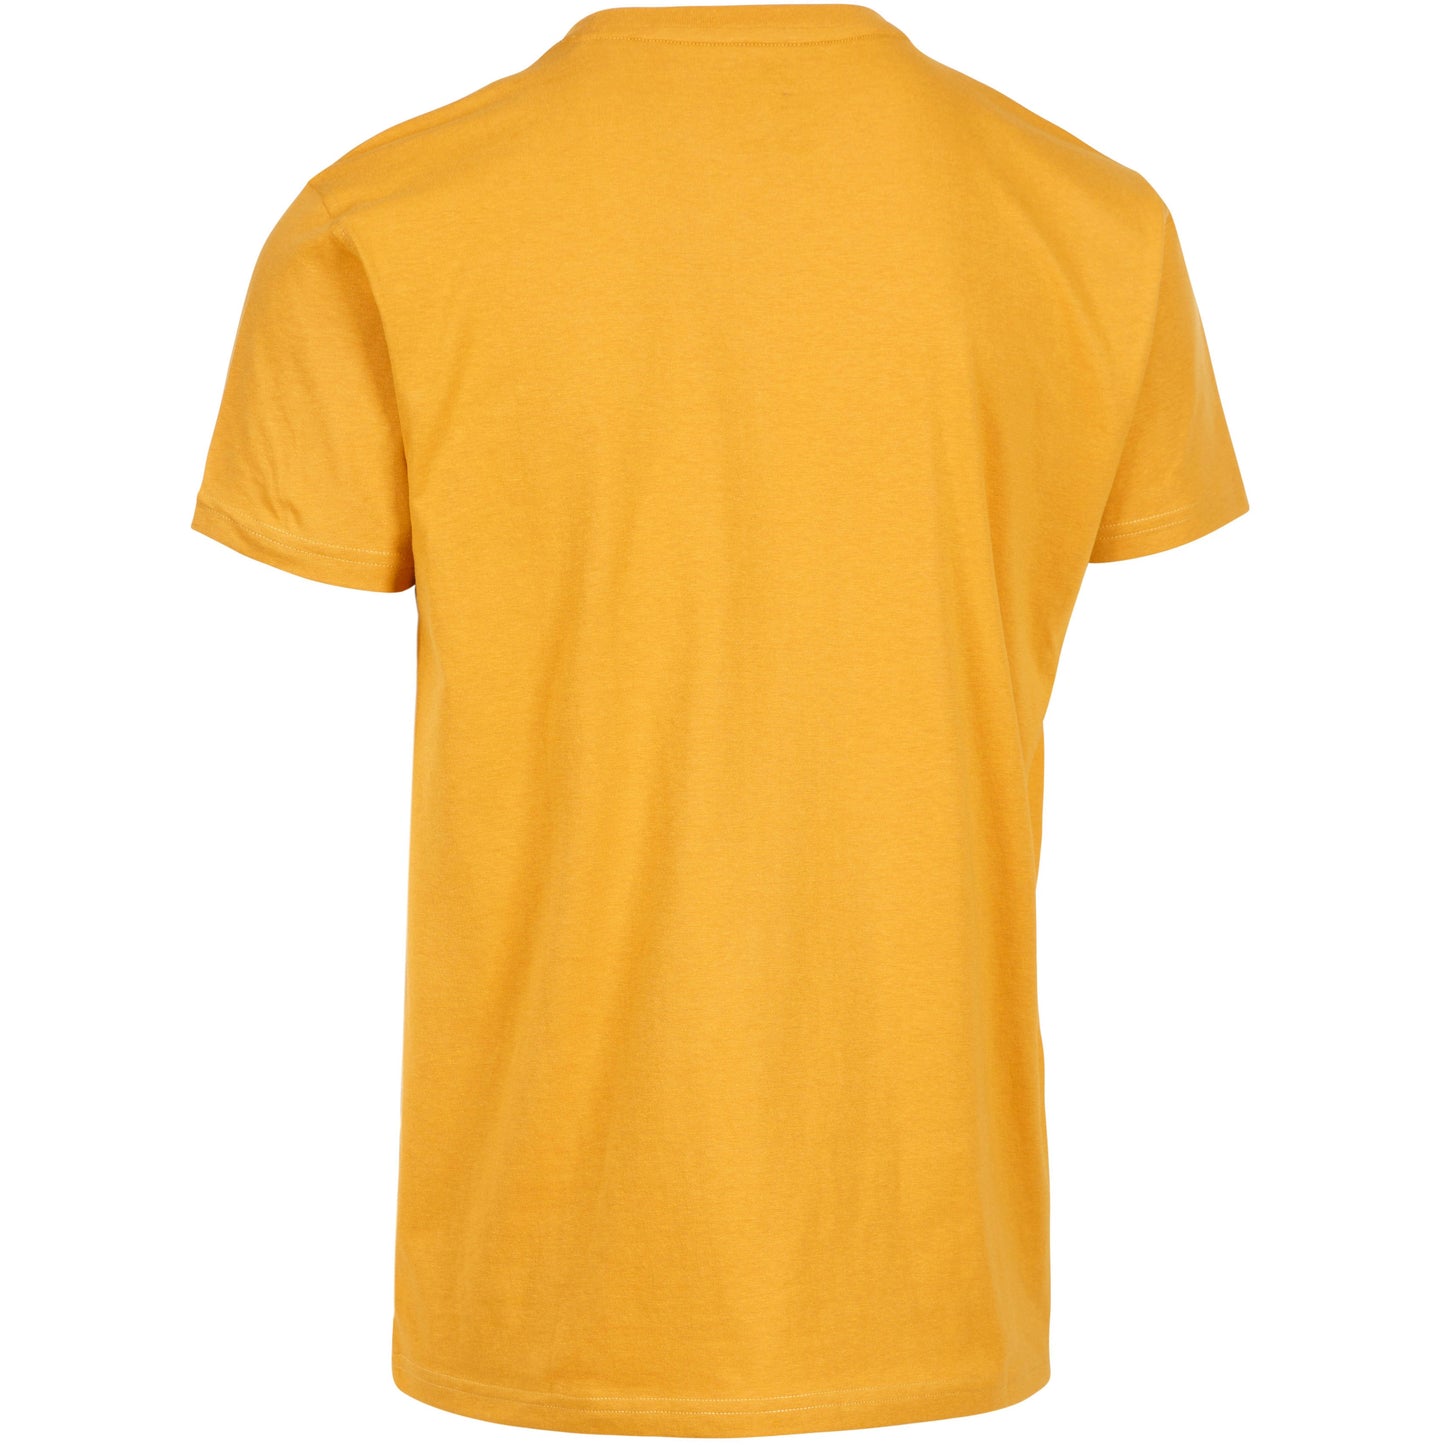 Cromer Men's Quick Dry Wicking T-Shirt in Maize